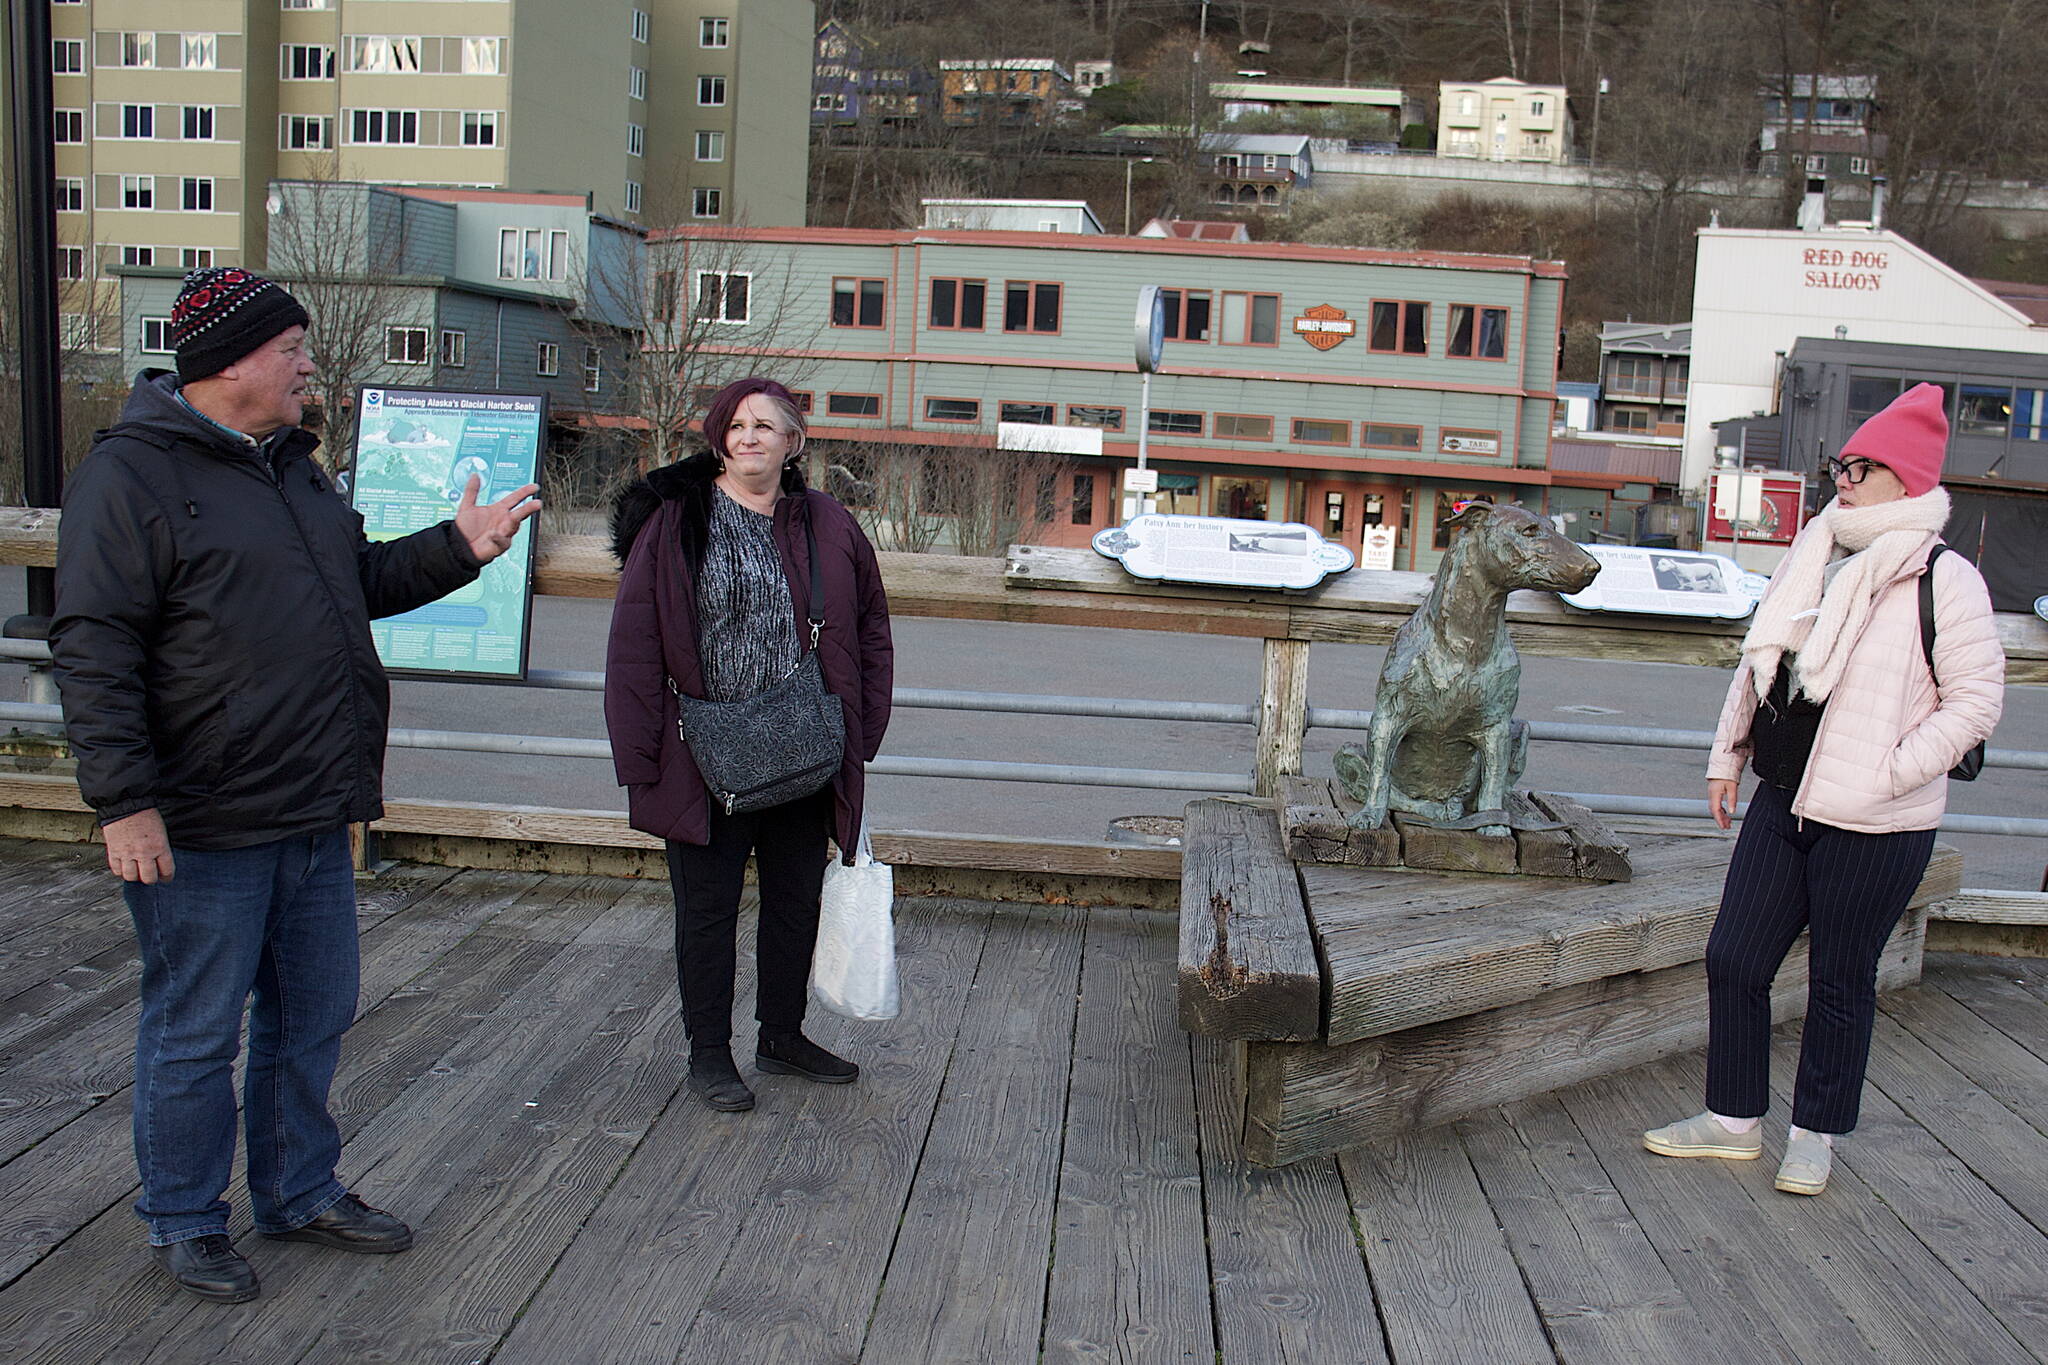 George Lacek (left), Diane Edwards (middle) and LaDele Sines discuss how they spent the last day of the cruise ship season near the Patsy Ann statue next to their ship Wednesday evening. (Mark Sabbatini / Juneau Empire)